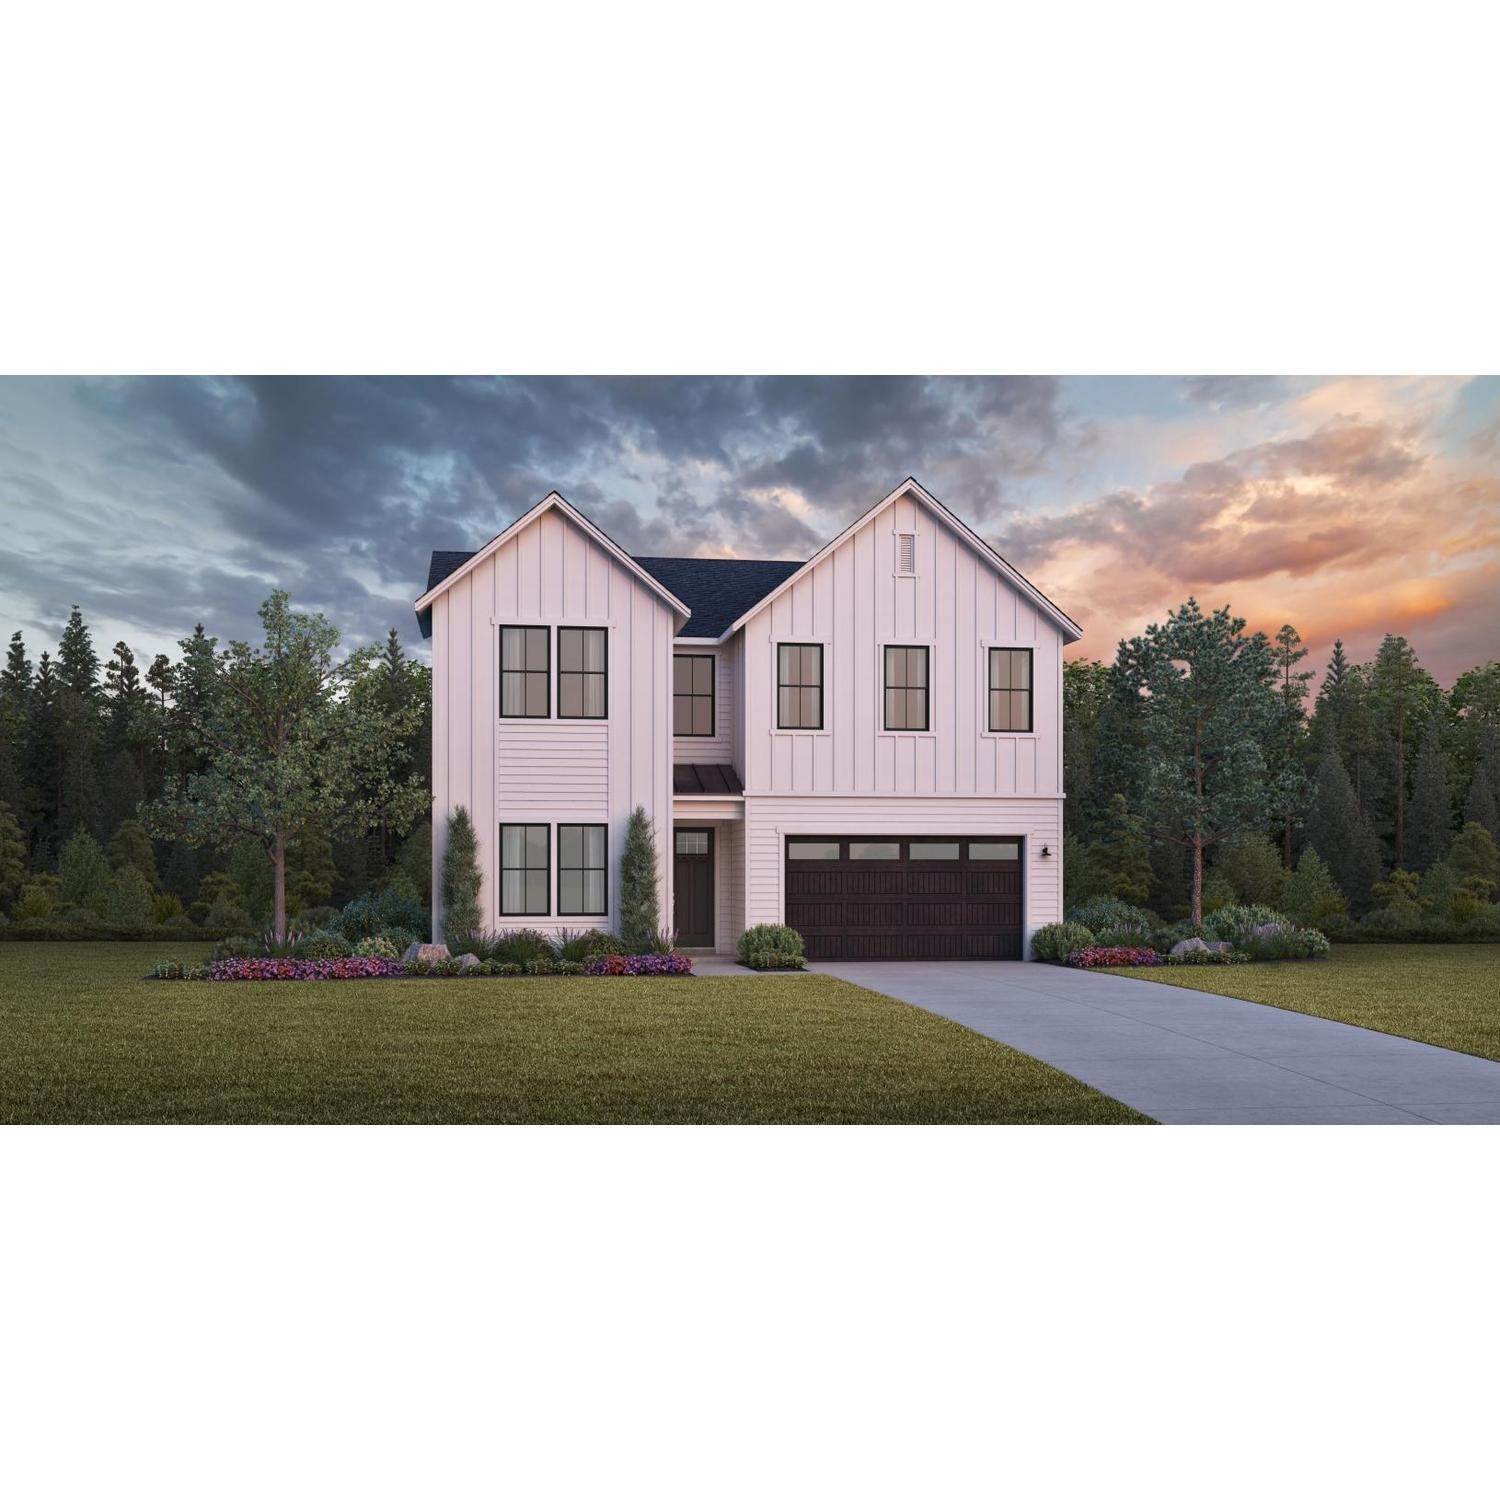 Toll Brothers at Hosford Farms - Vista Collection building at 15721 NW Gooderham St, Portland, OR 97229